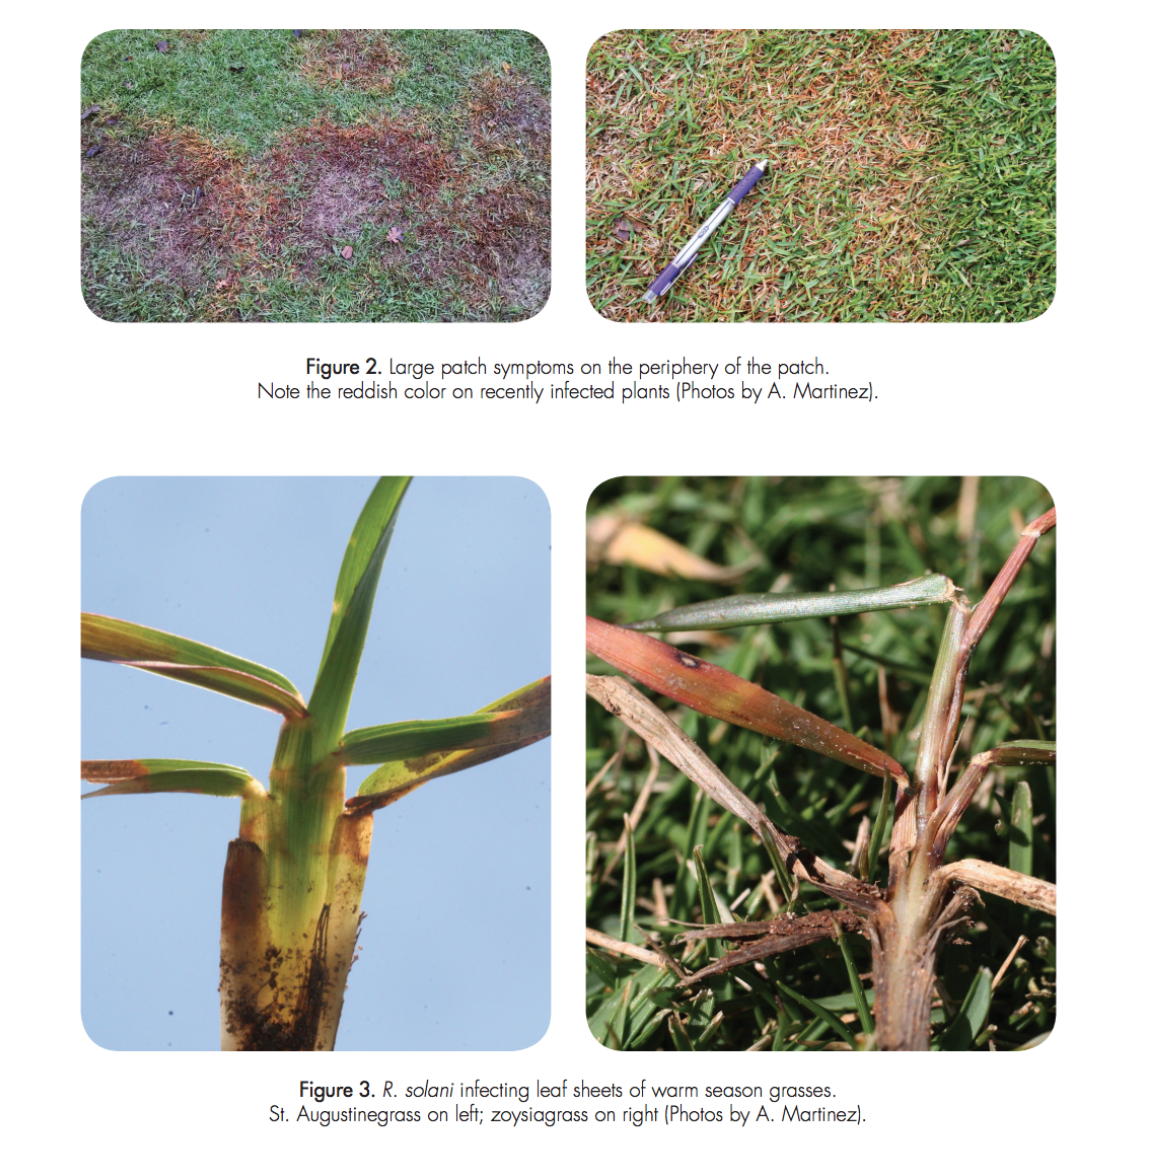 Figure 2. Large patch symptoms on the periphery of the patch. Note the reddish color on recently infected plants (Photos by A. Martinez). Figure 3. R. solani infecting leaf sheets of warm season grasses. St. Augustinegrass on left; zoysiagrass on right (Photos by A. Martinez).